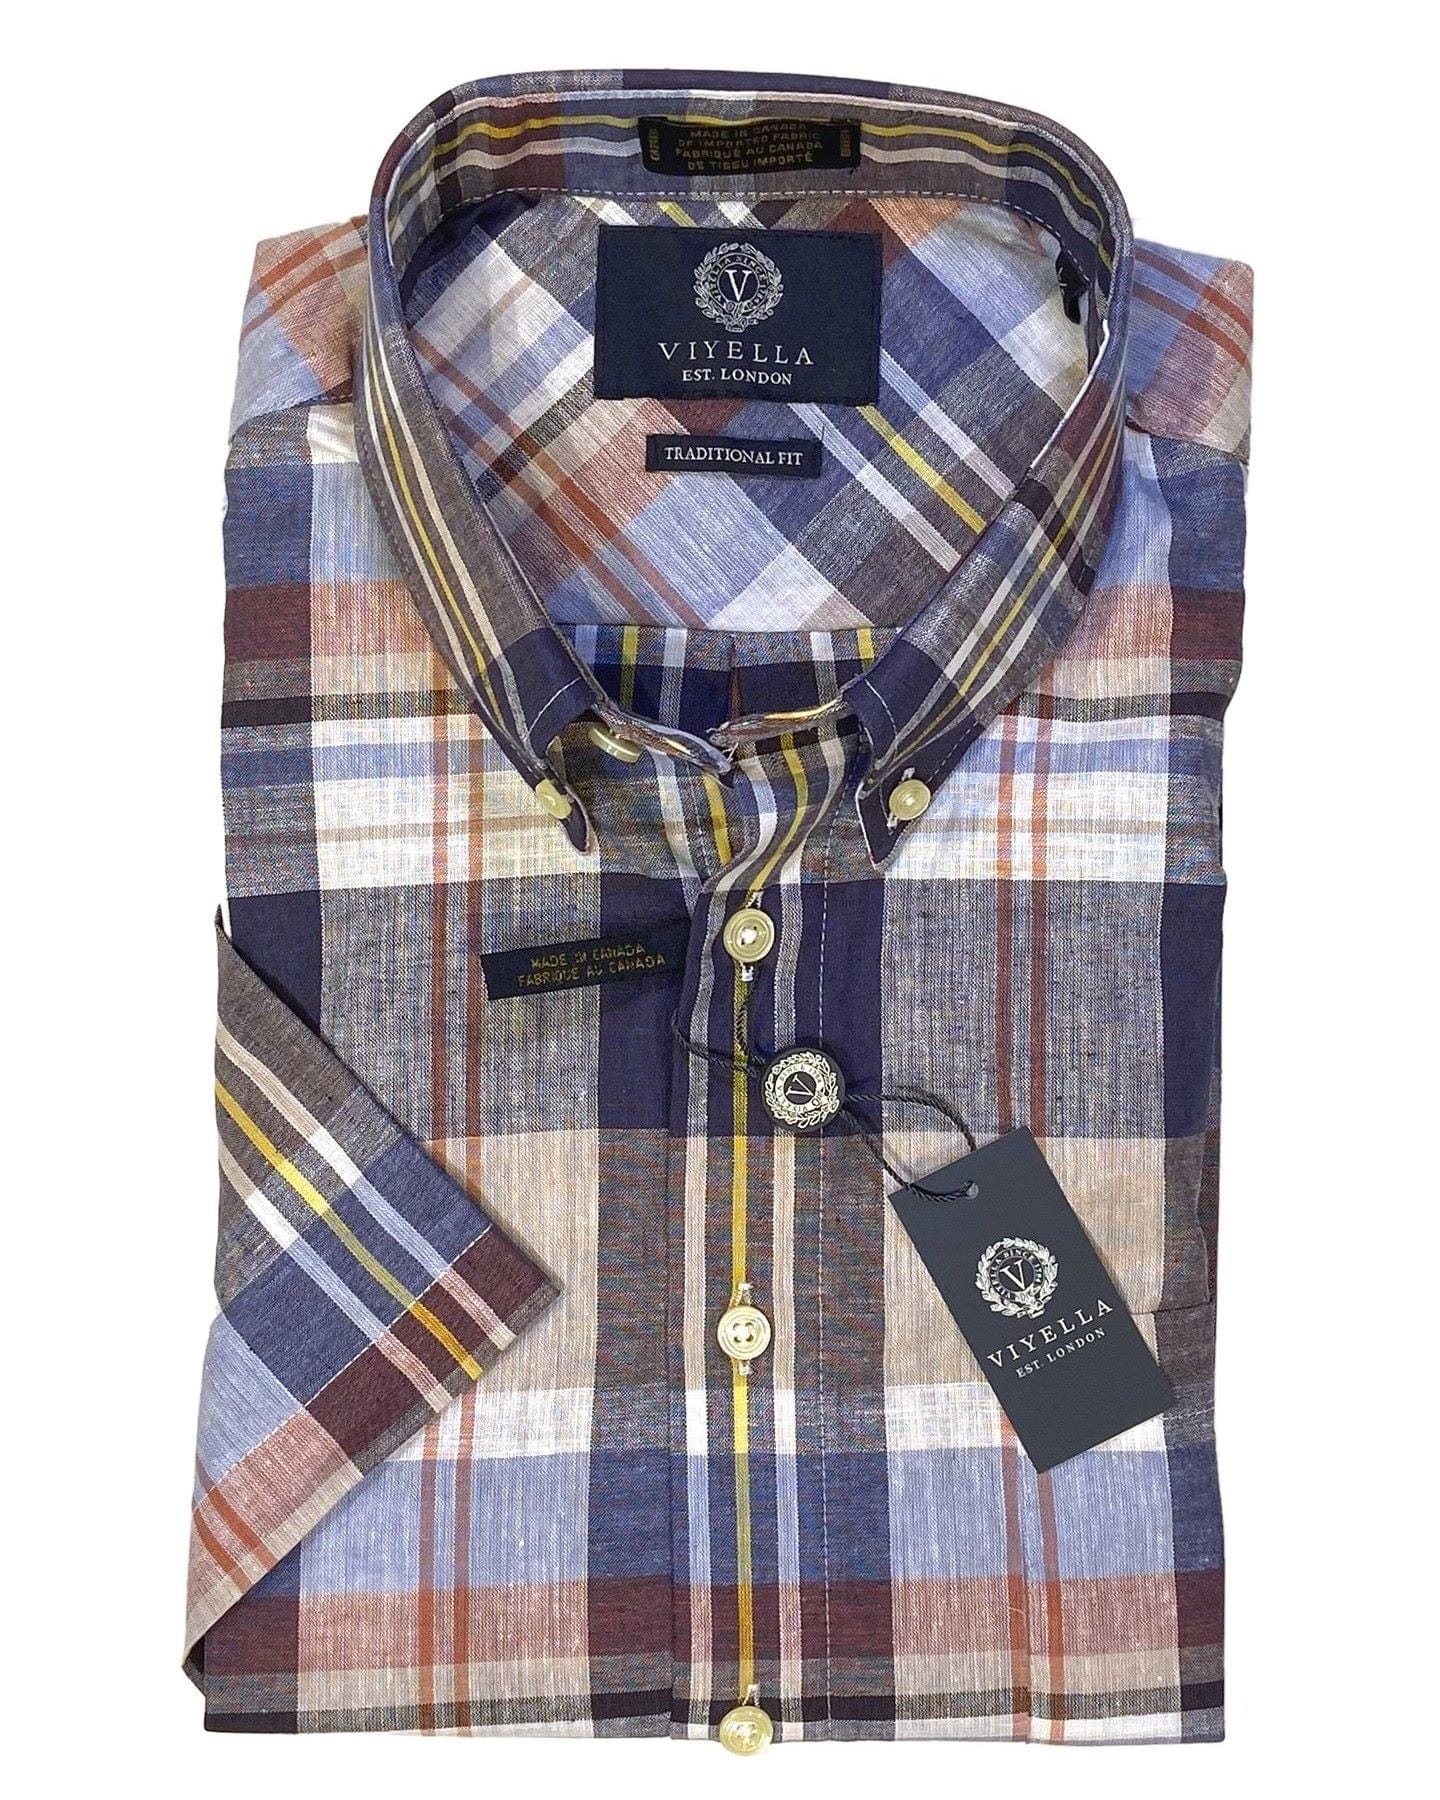 Viyella Canadian Made Cotton and Linen Blue Plaid Button Down Short Sleeve Shirts